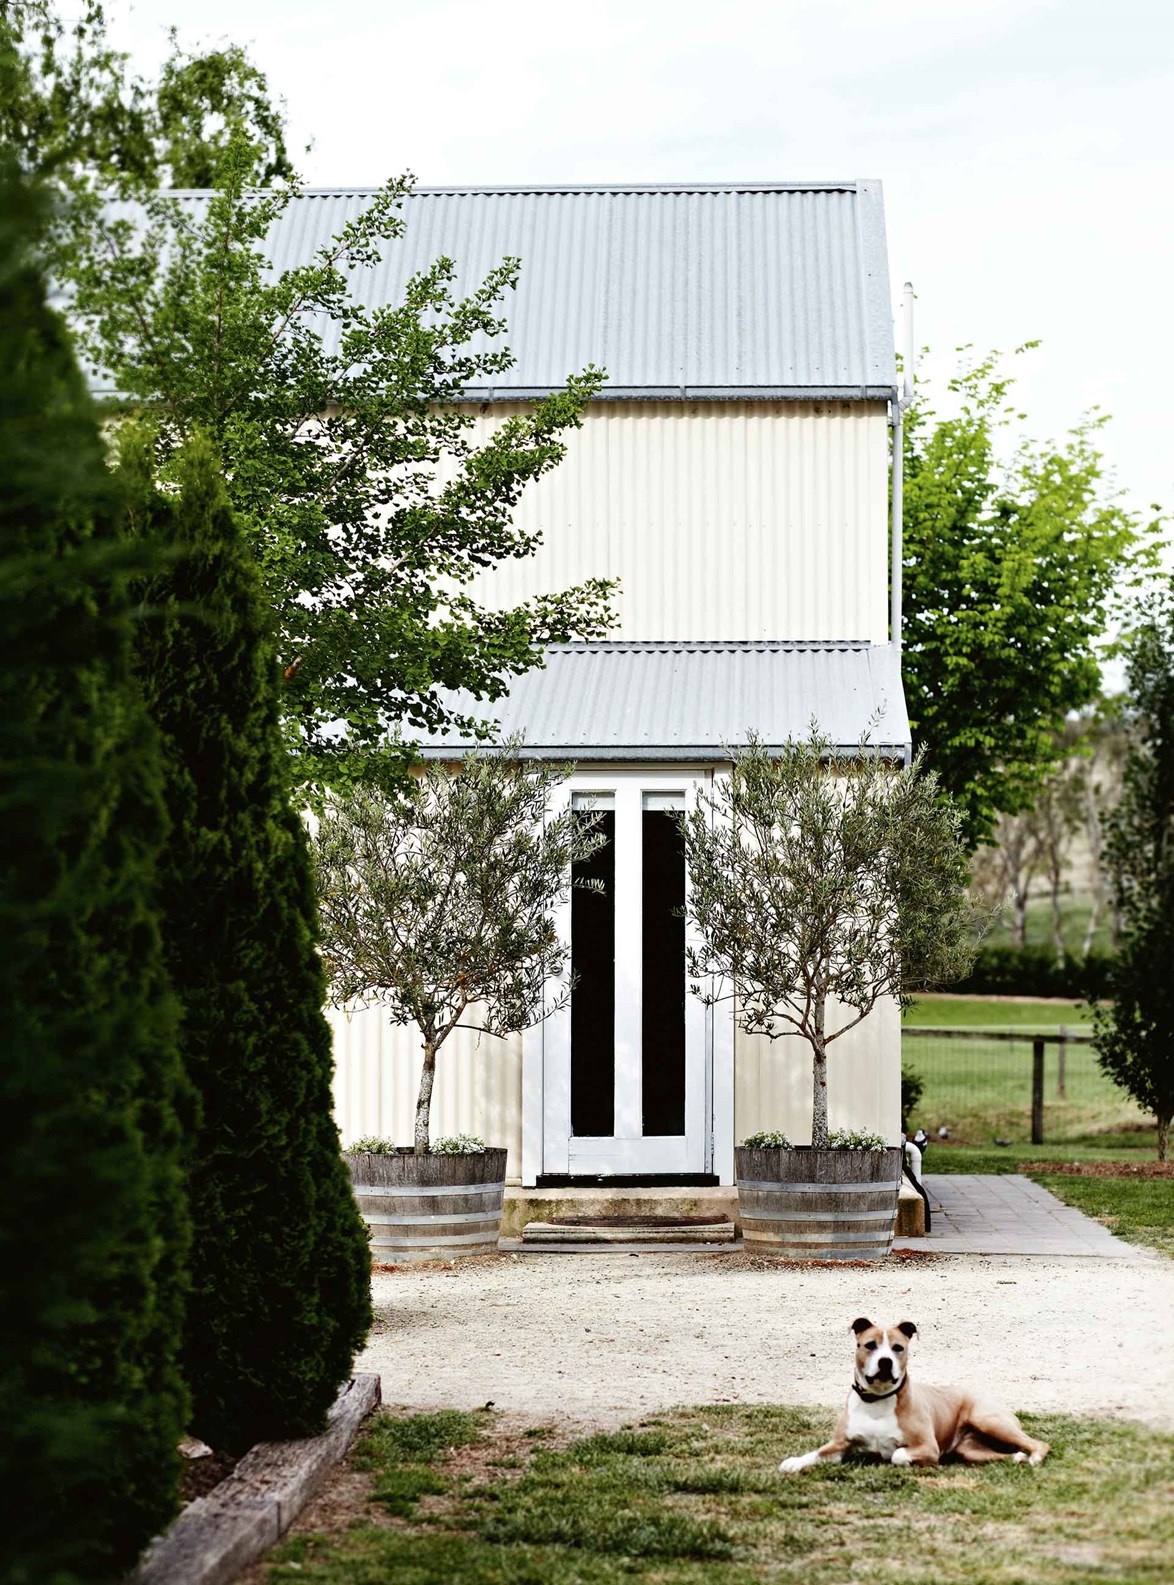 American Staffordshire terrier Paris guards the entrance of the converted shed.